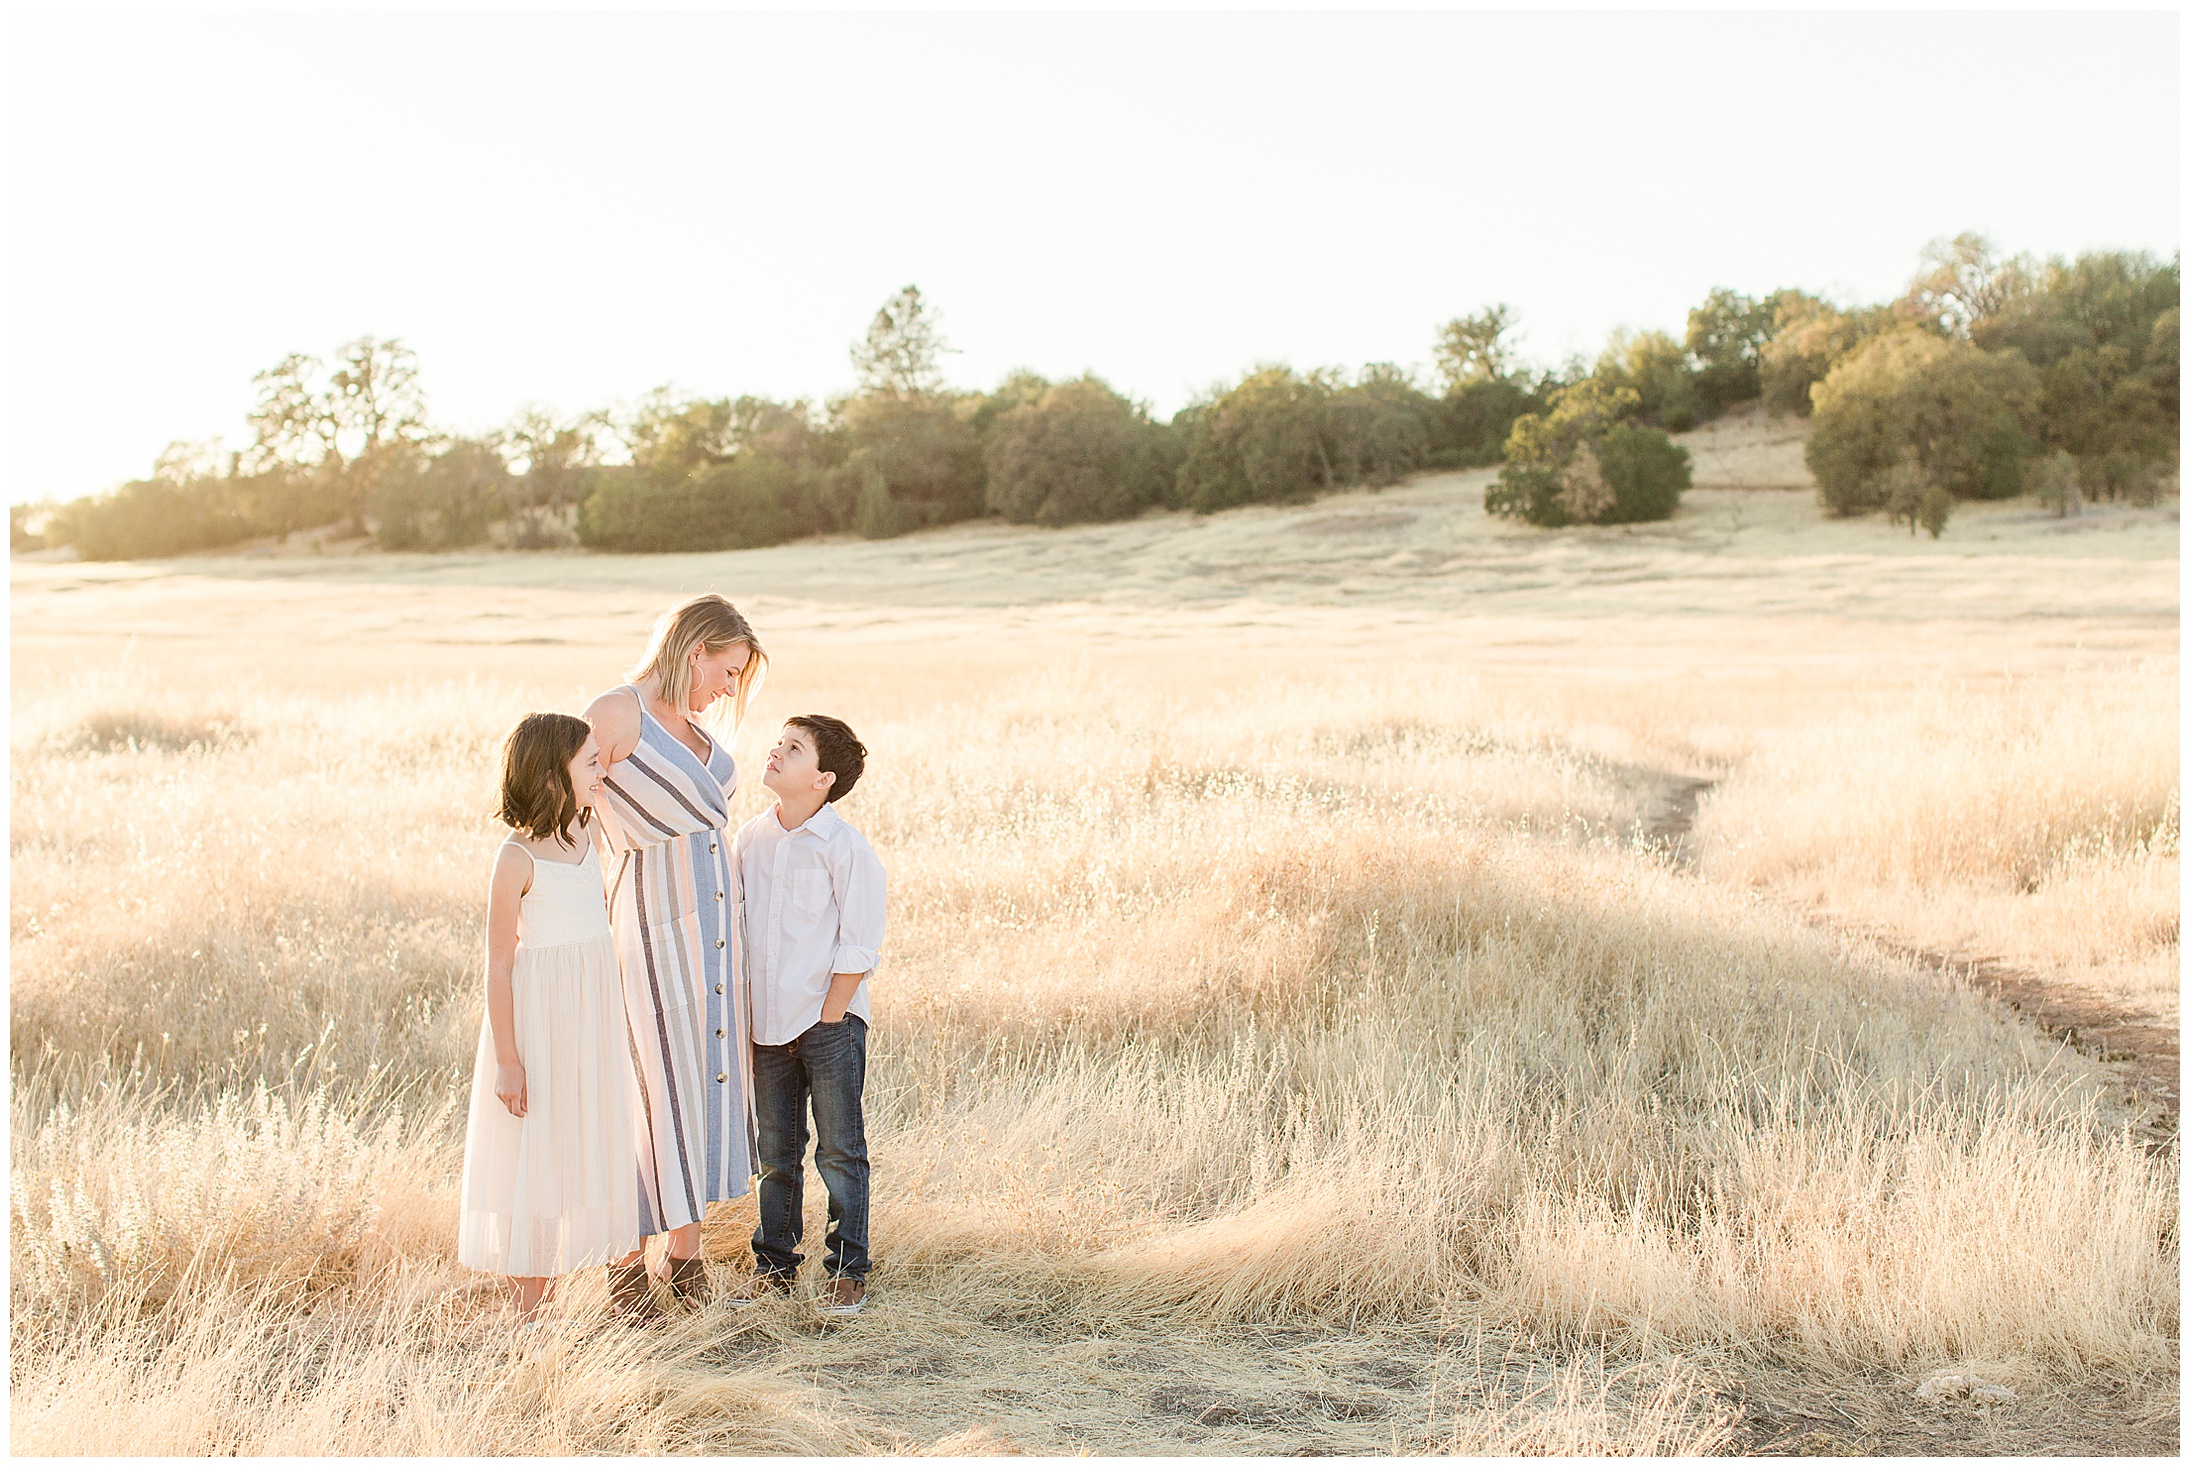 Upper Bidwell Park Chico CA Family Session Sunset,